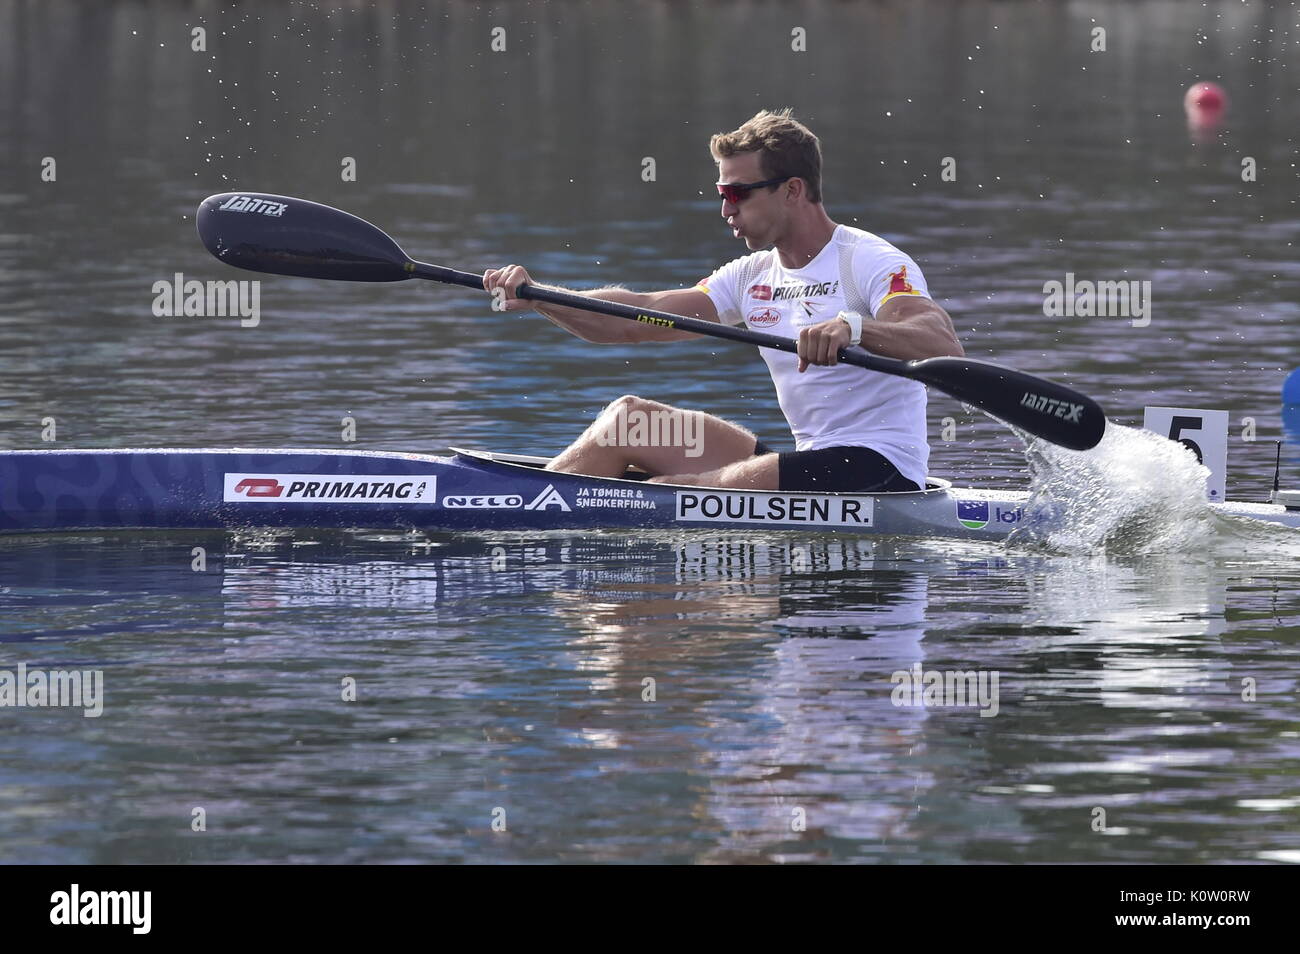 RENE HOLTEN POULSEN of Denmark in action during the 2017 ICF Canoe Sprint World Championships in Racice, Czech Republic, August 24, 2017. (CTK Photo/Roman Vondrous) Stock Photo